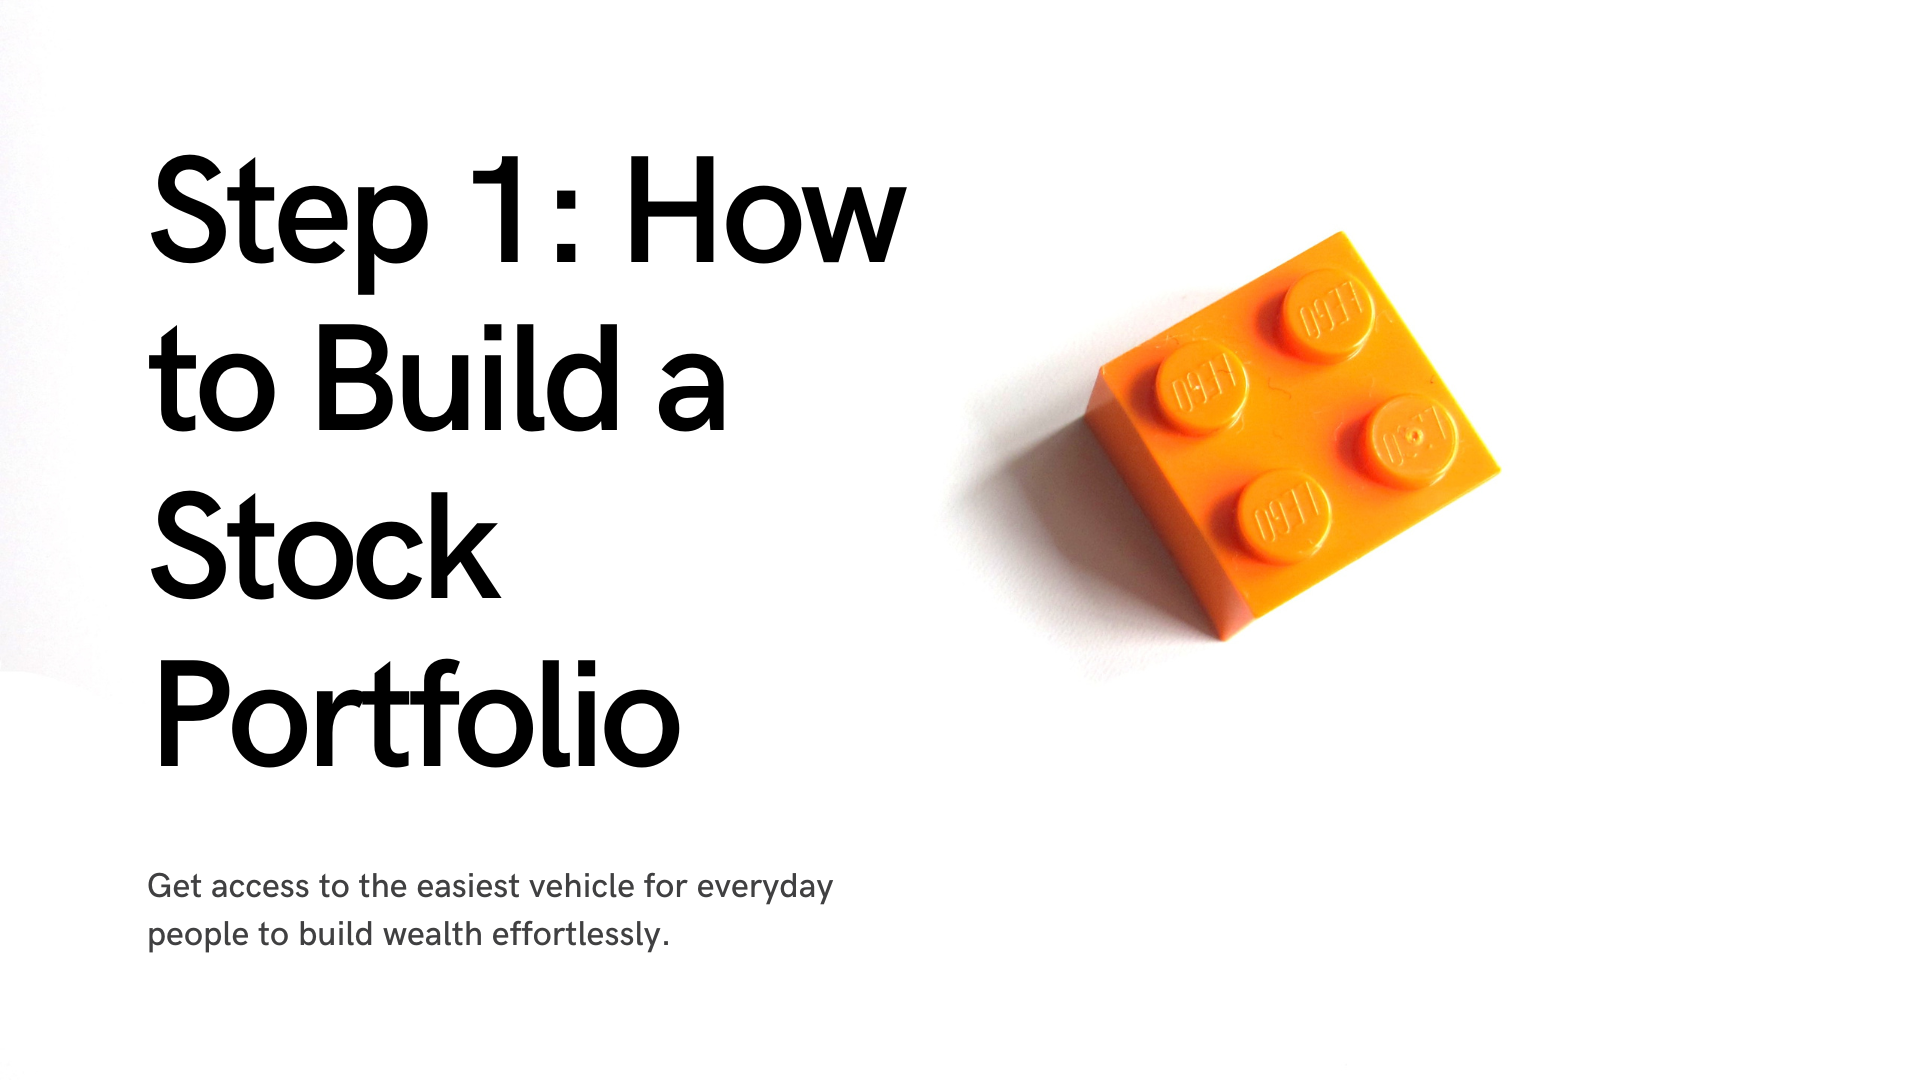 Step 1: How to Build a Stock Portfolio. Get access to the easiest vehicle for everyday people to build wealth effortlessly.